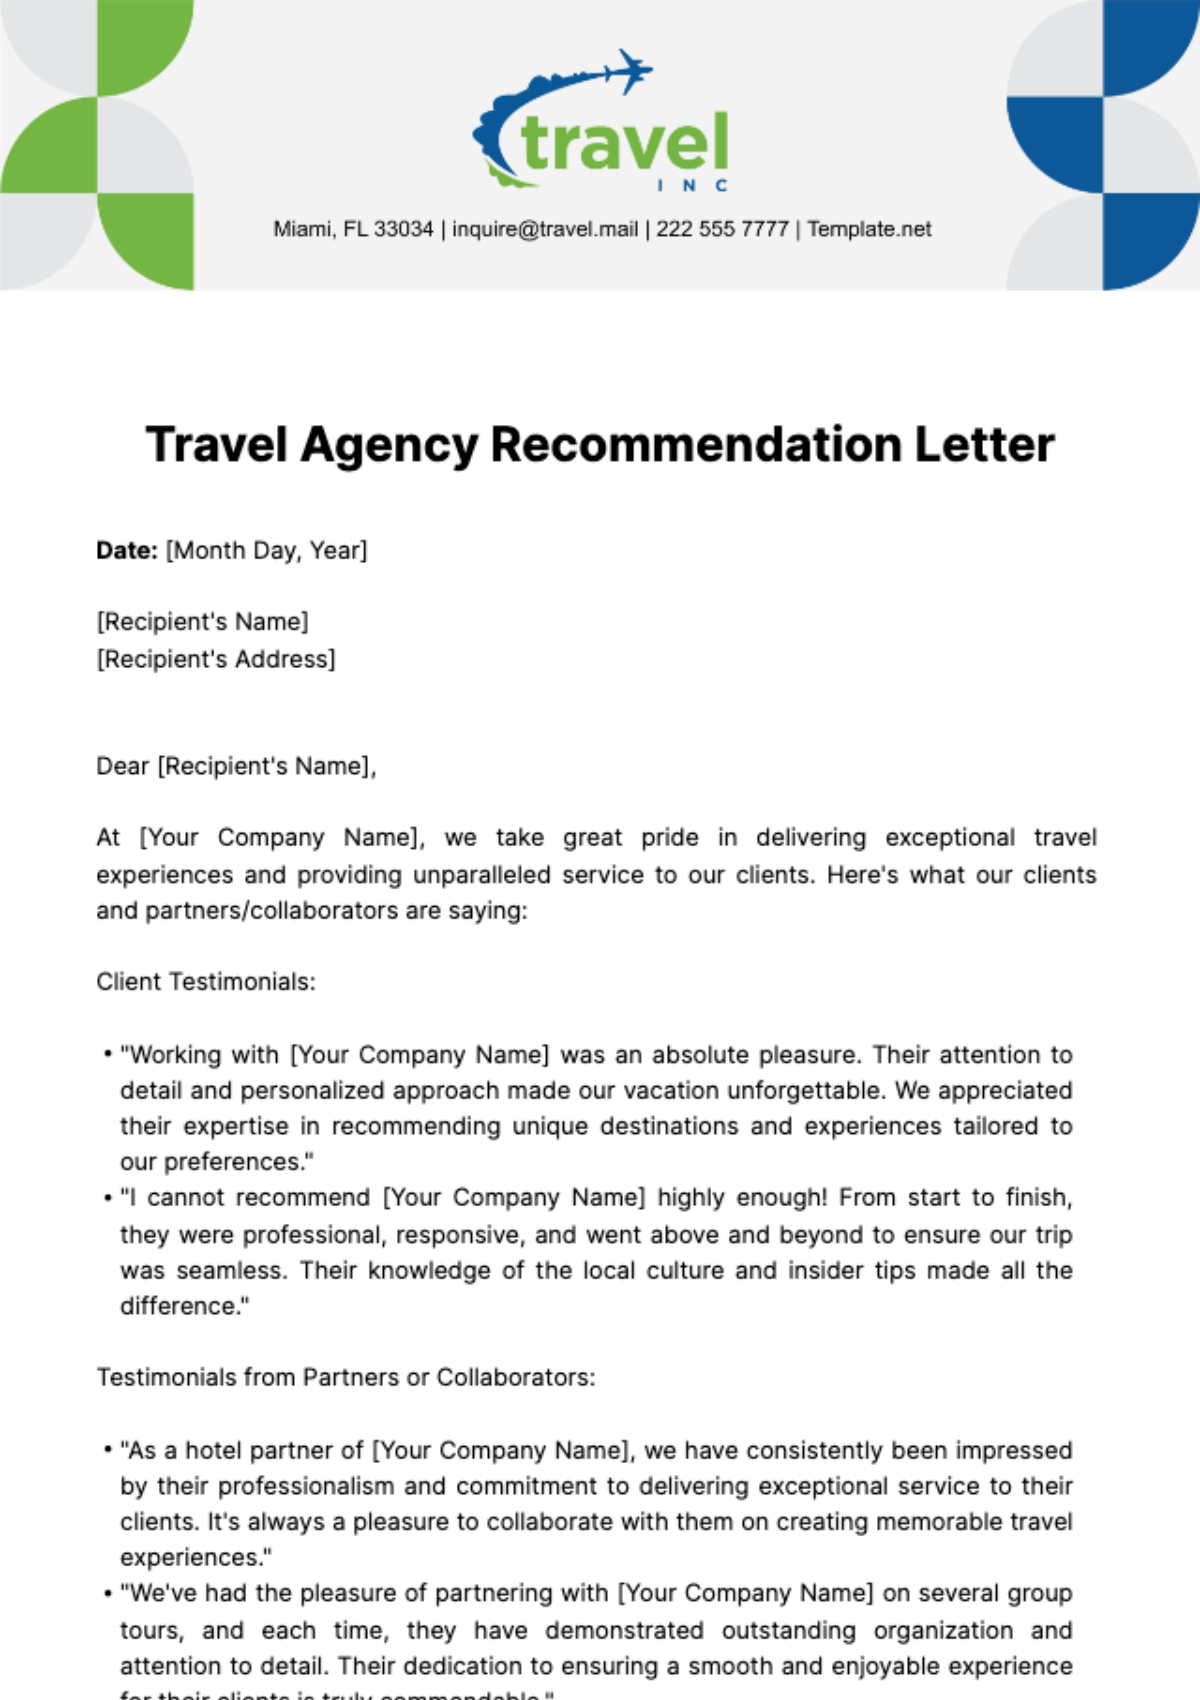 Travel Agency Recommendation Letter Template